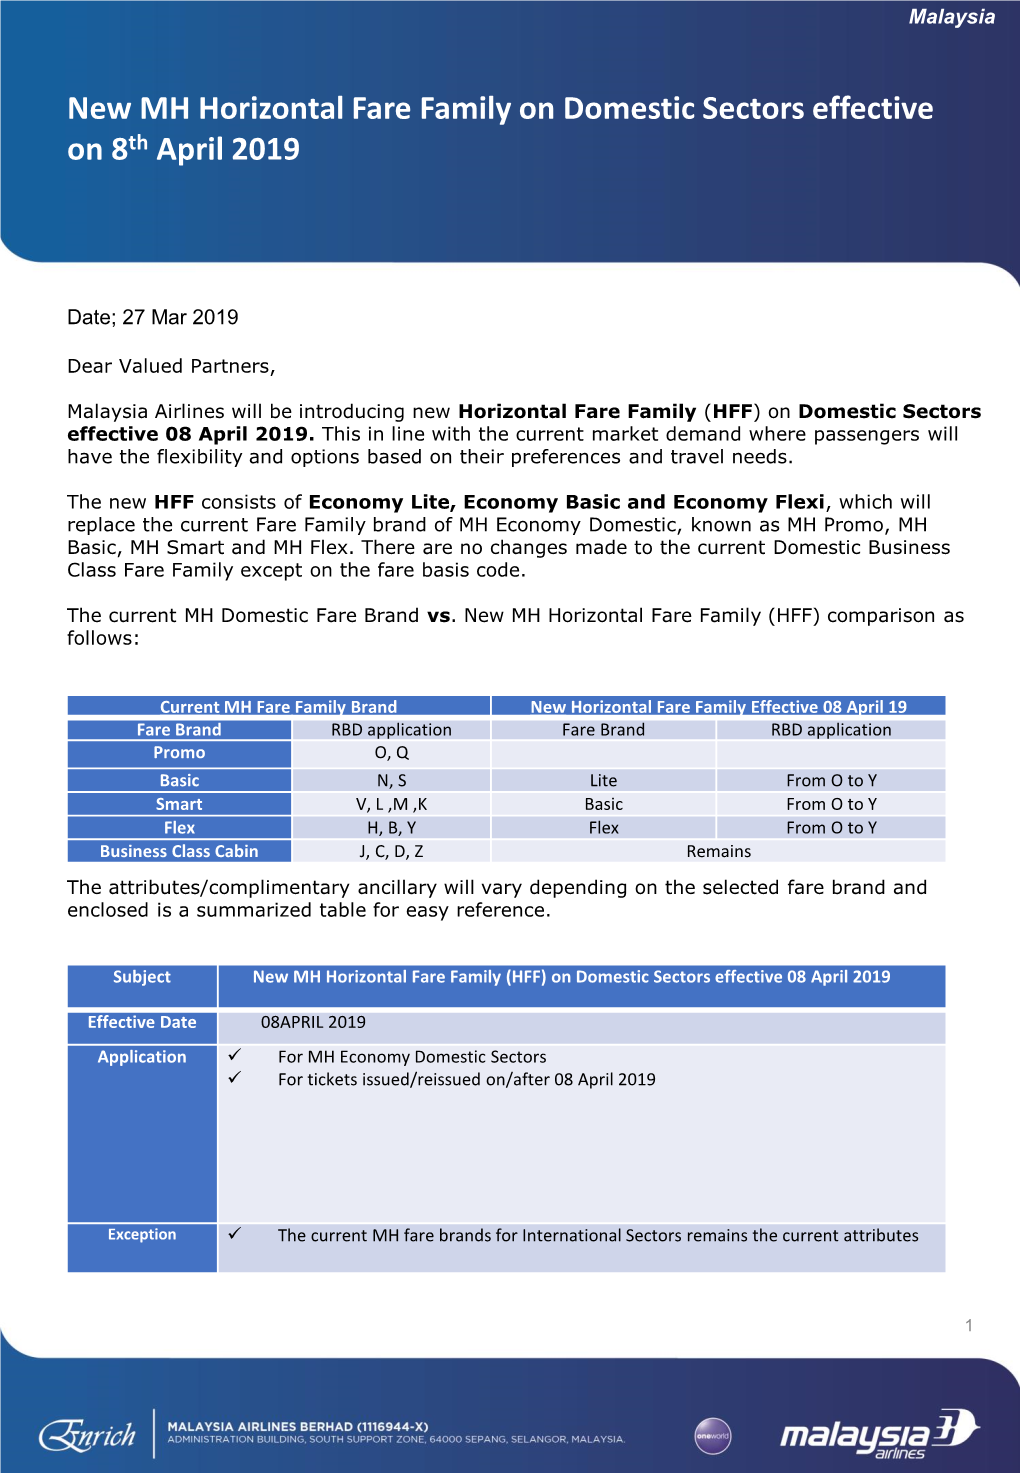 New MH Horizontal Fare Family on Domestic Sectors Effective on 8Th April 2019